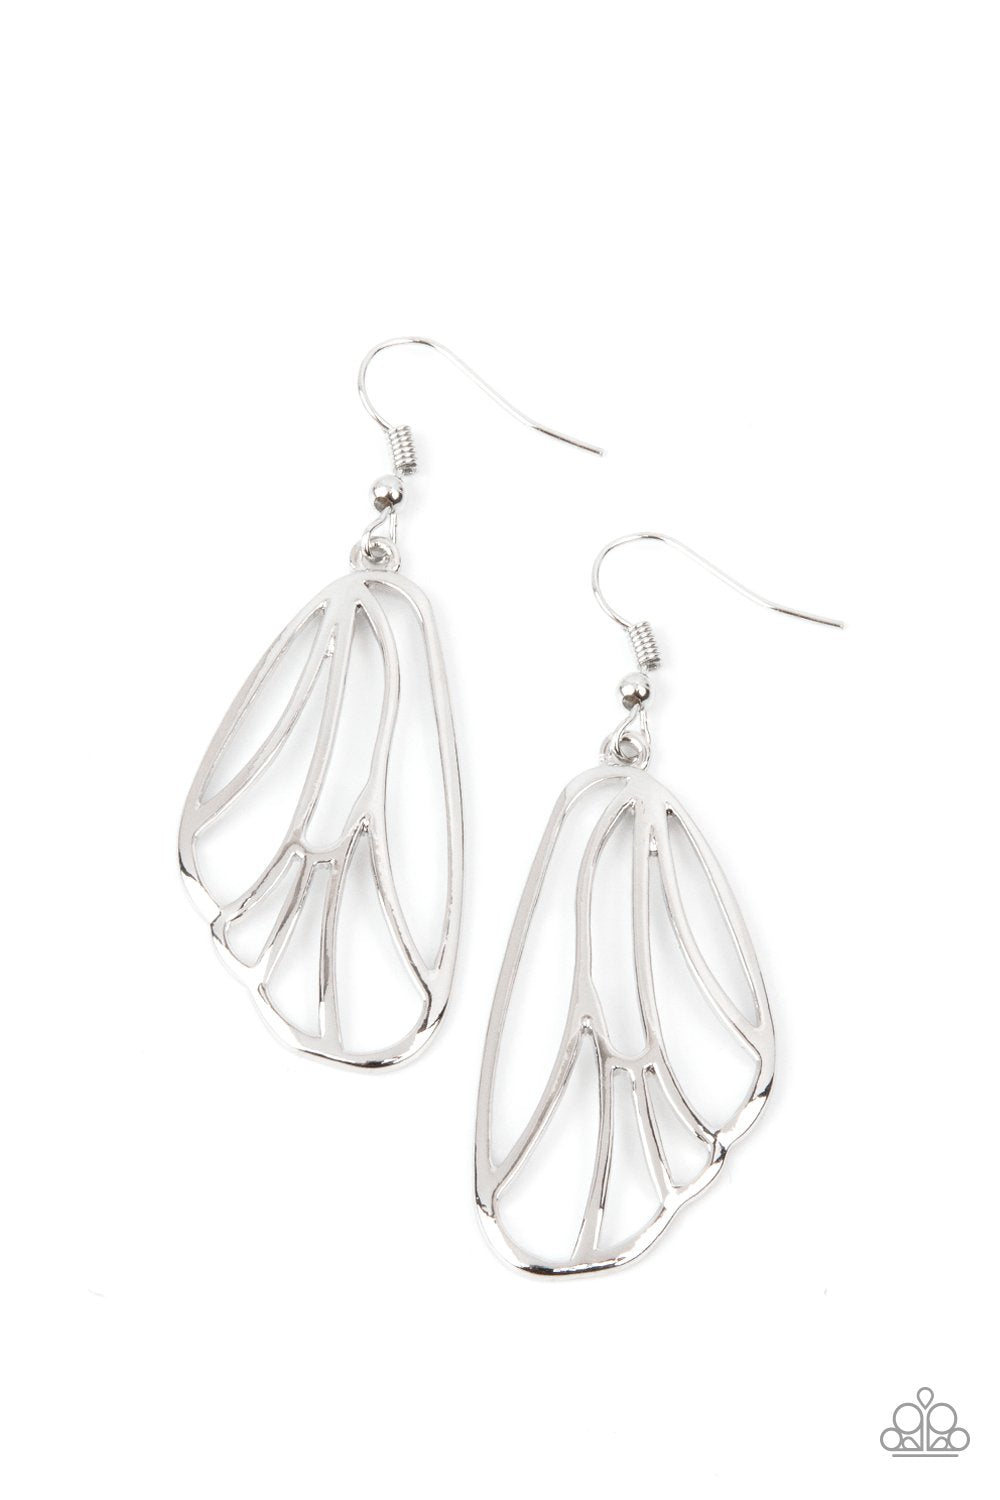 &lt;p&gt;Shiny silver bars fan out into a pair of delicately scalloped wings, creating a whimsical display. Earring attaches to a standard fishhook fitting. &lt;/p&gt;  

&lt;p&gt; &lt;i&gt;  Sold as one pair of earrings. &lt;/i&gt;  &lt;/p&gt;

&lt;img src=\&quot;https://d9b54x484lq62.cloudfront.net/paparazzi/shopping/images/517_tag150x115_1.png\&quot; alt=\&quot;New Kit\&quot; align=\&quot;middle\&quot; height=\&quot;50\&quot; width=\&quot;50\&quot;&gt;